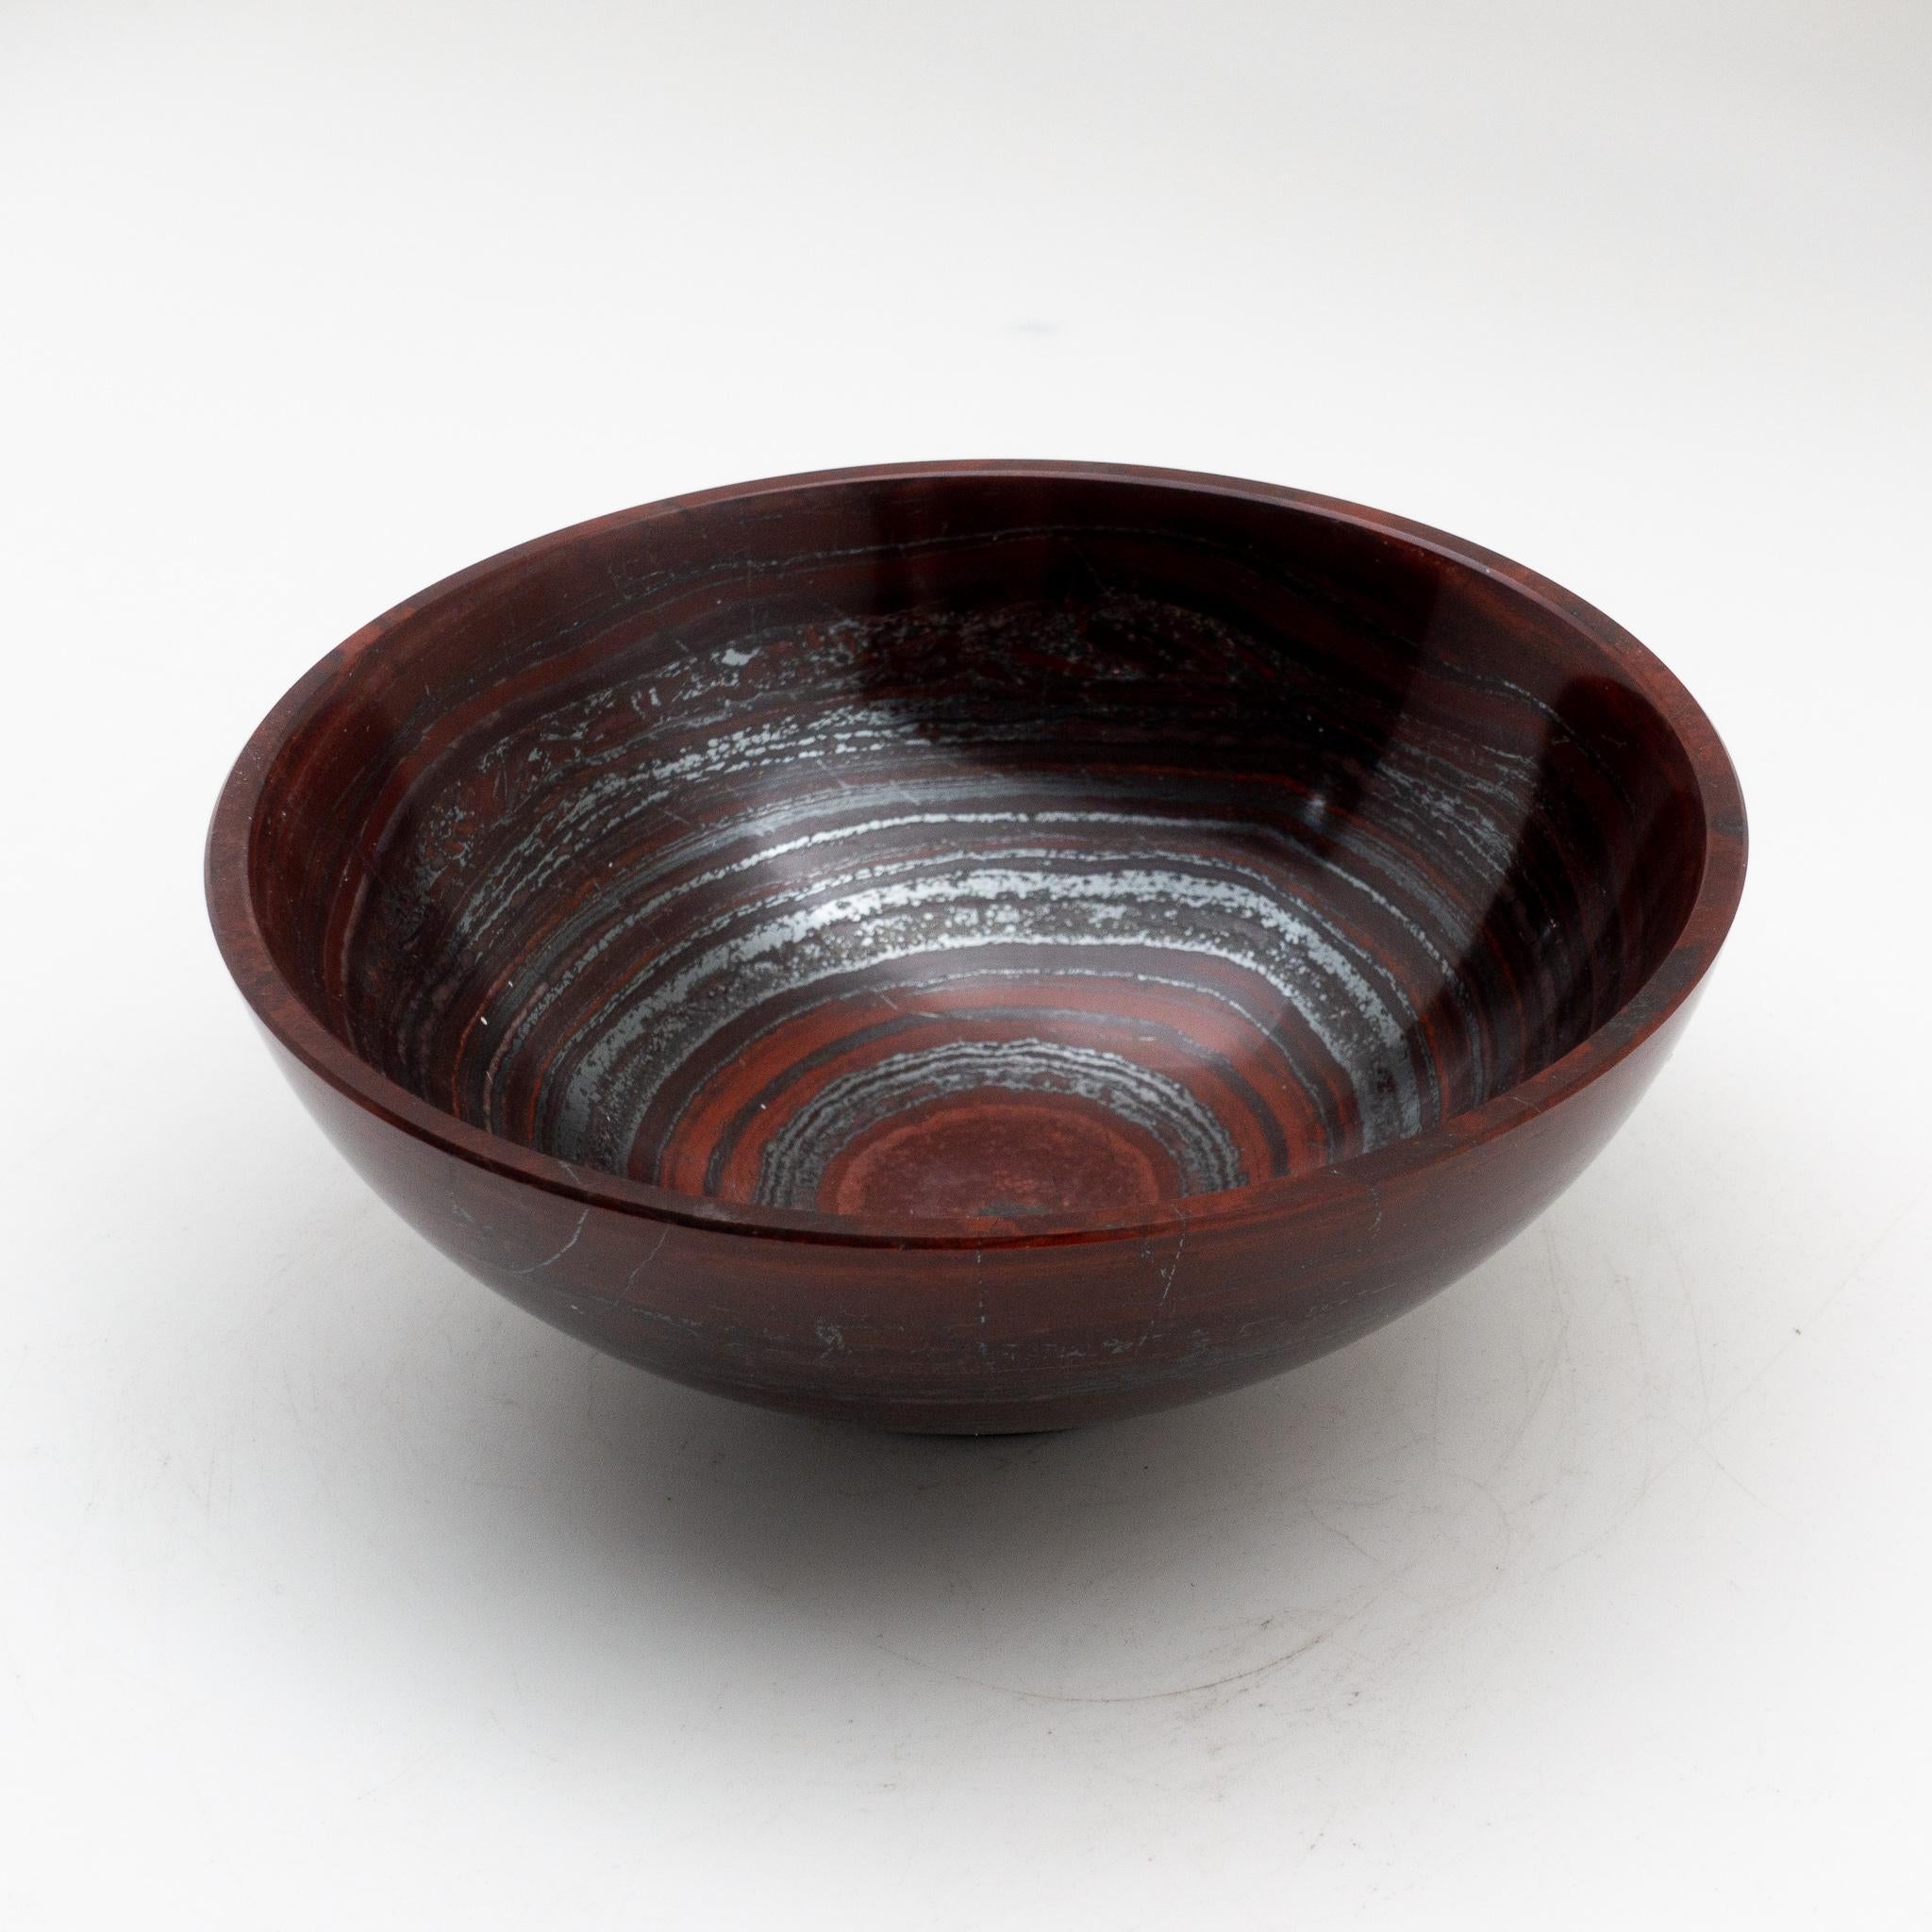 Hand carved and polished bowl, featuring bands of haematite (silver) alternate with bands of jasper (red). This 6